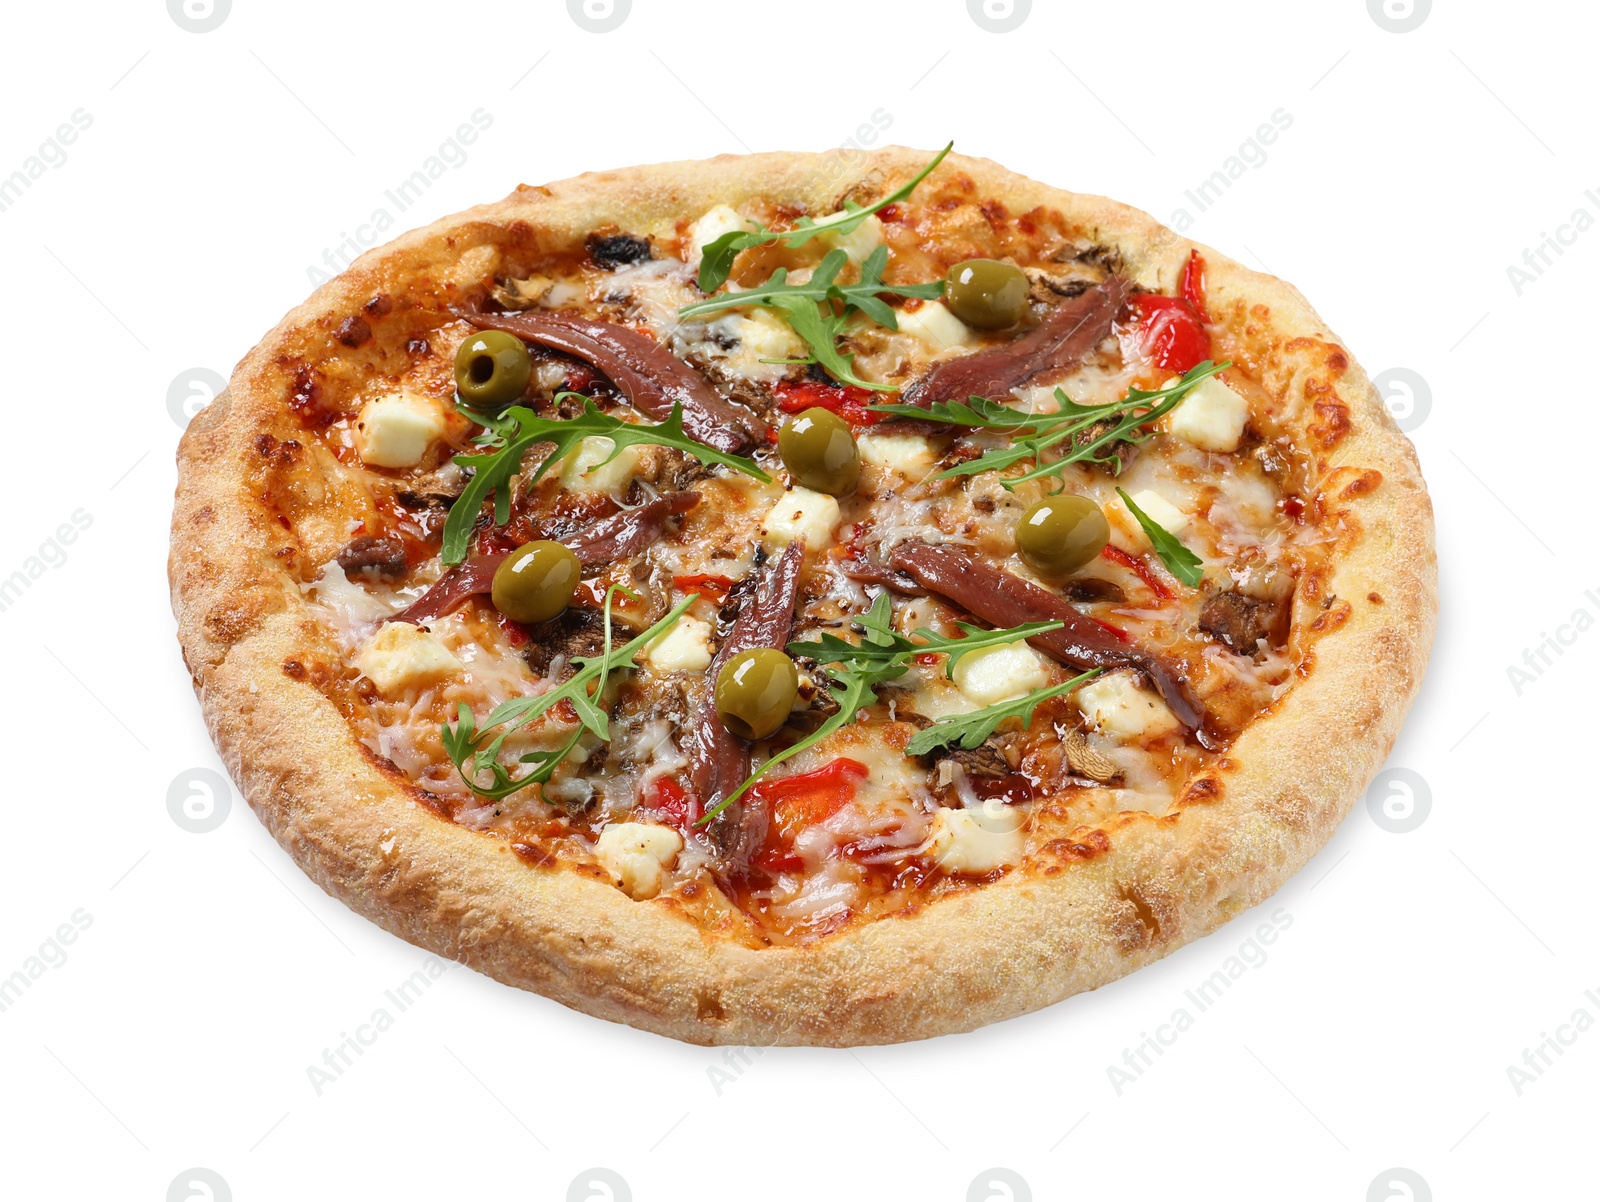 Photo of Tasty pizza with anchovies, arugula and olives isolated on white